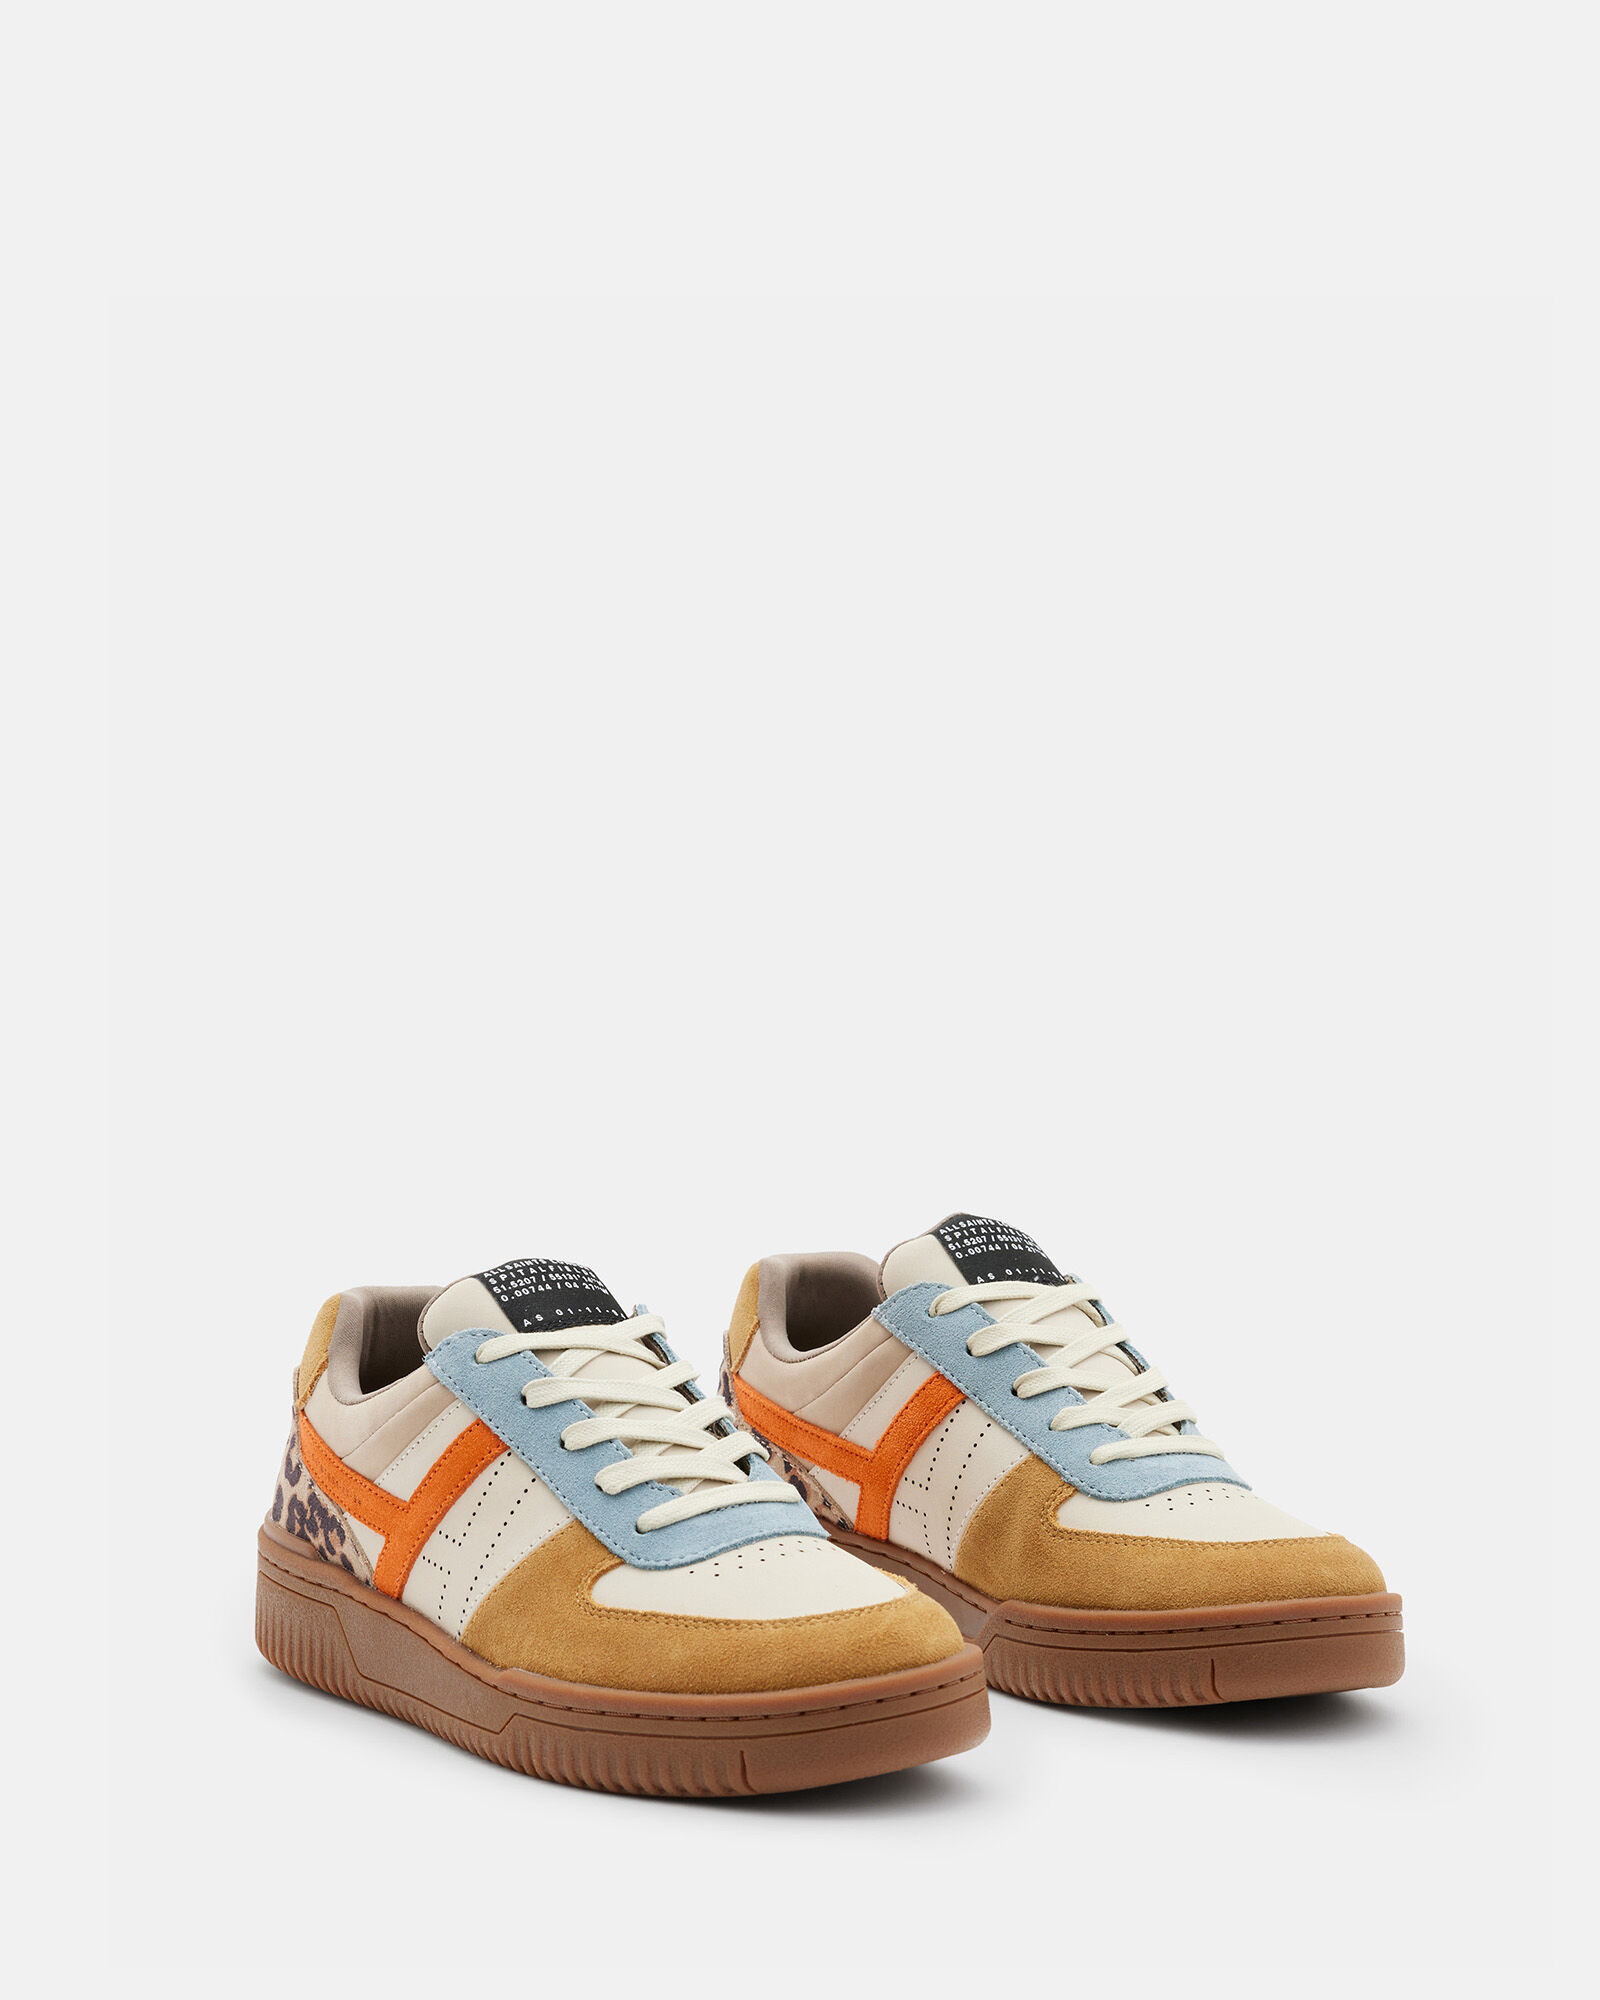 Vix Low Top Round Toe Leather Sneakers